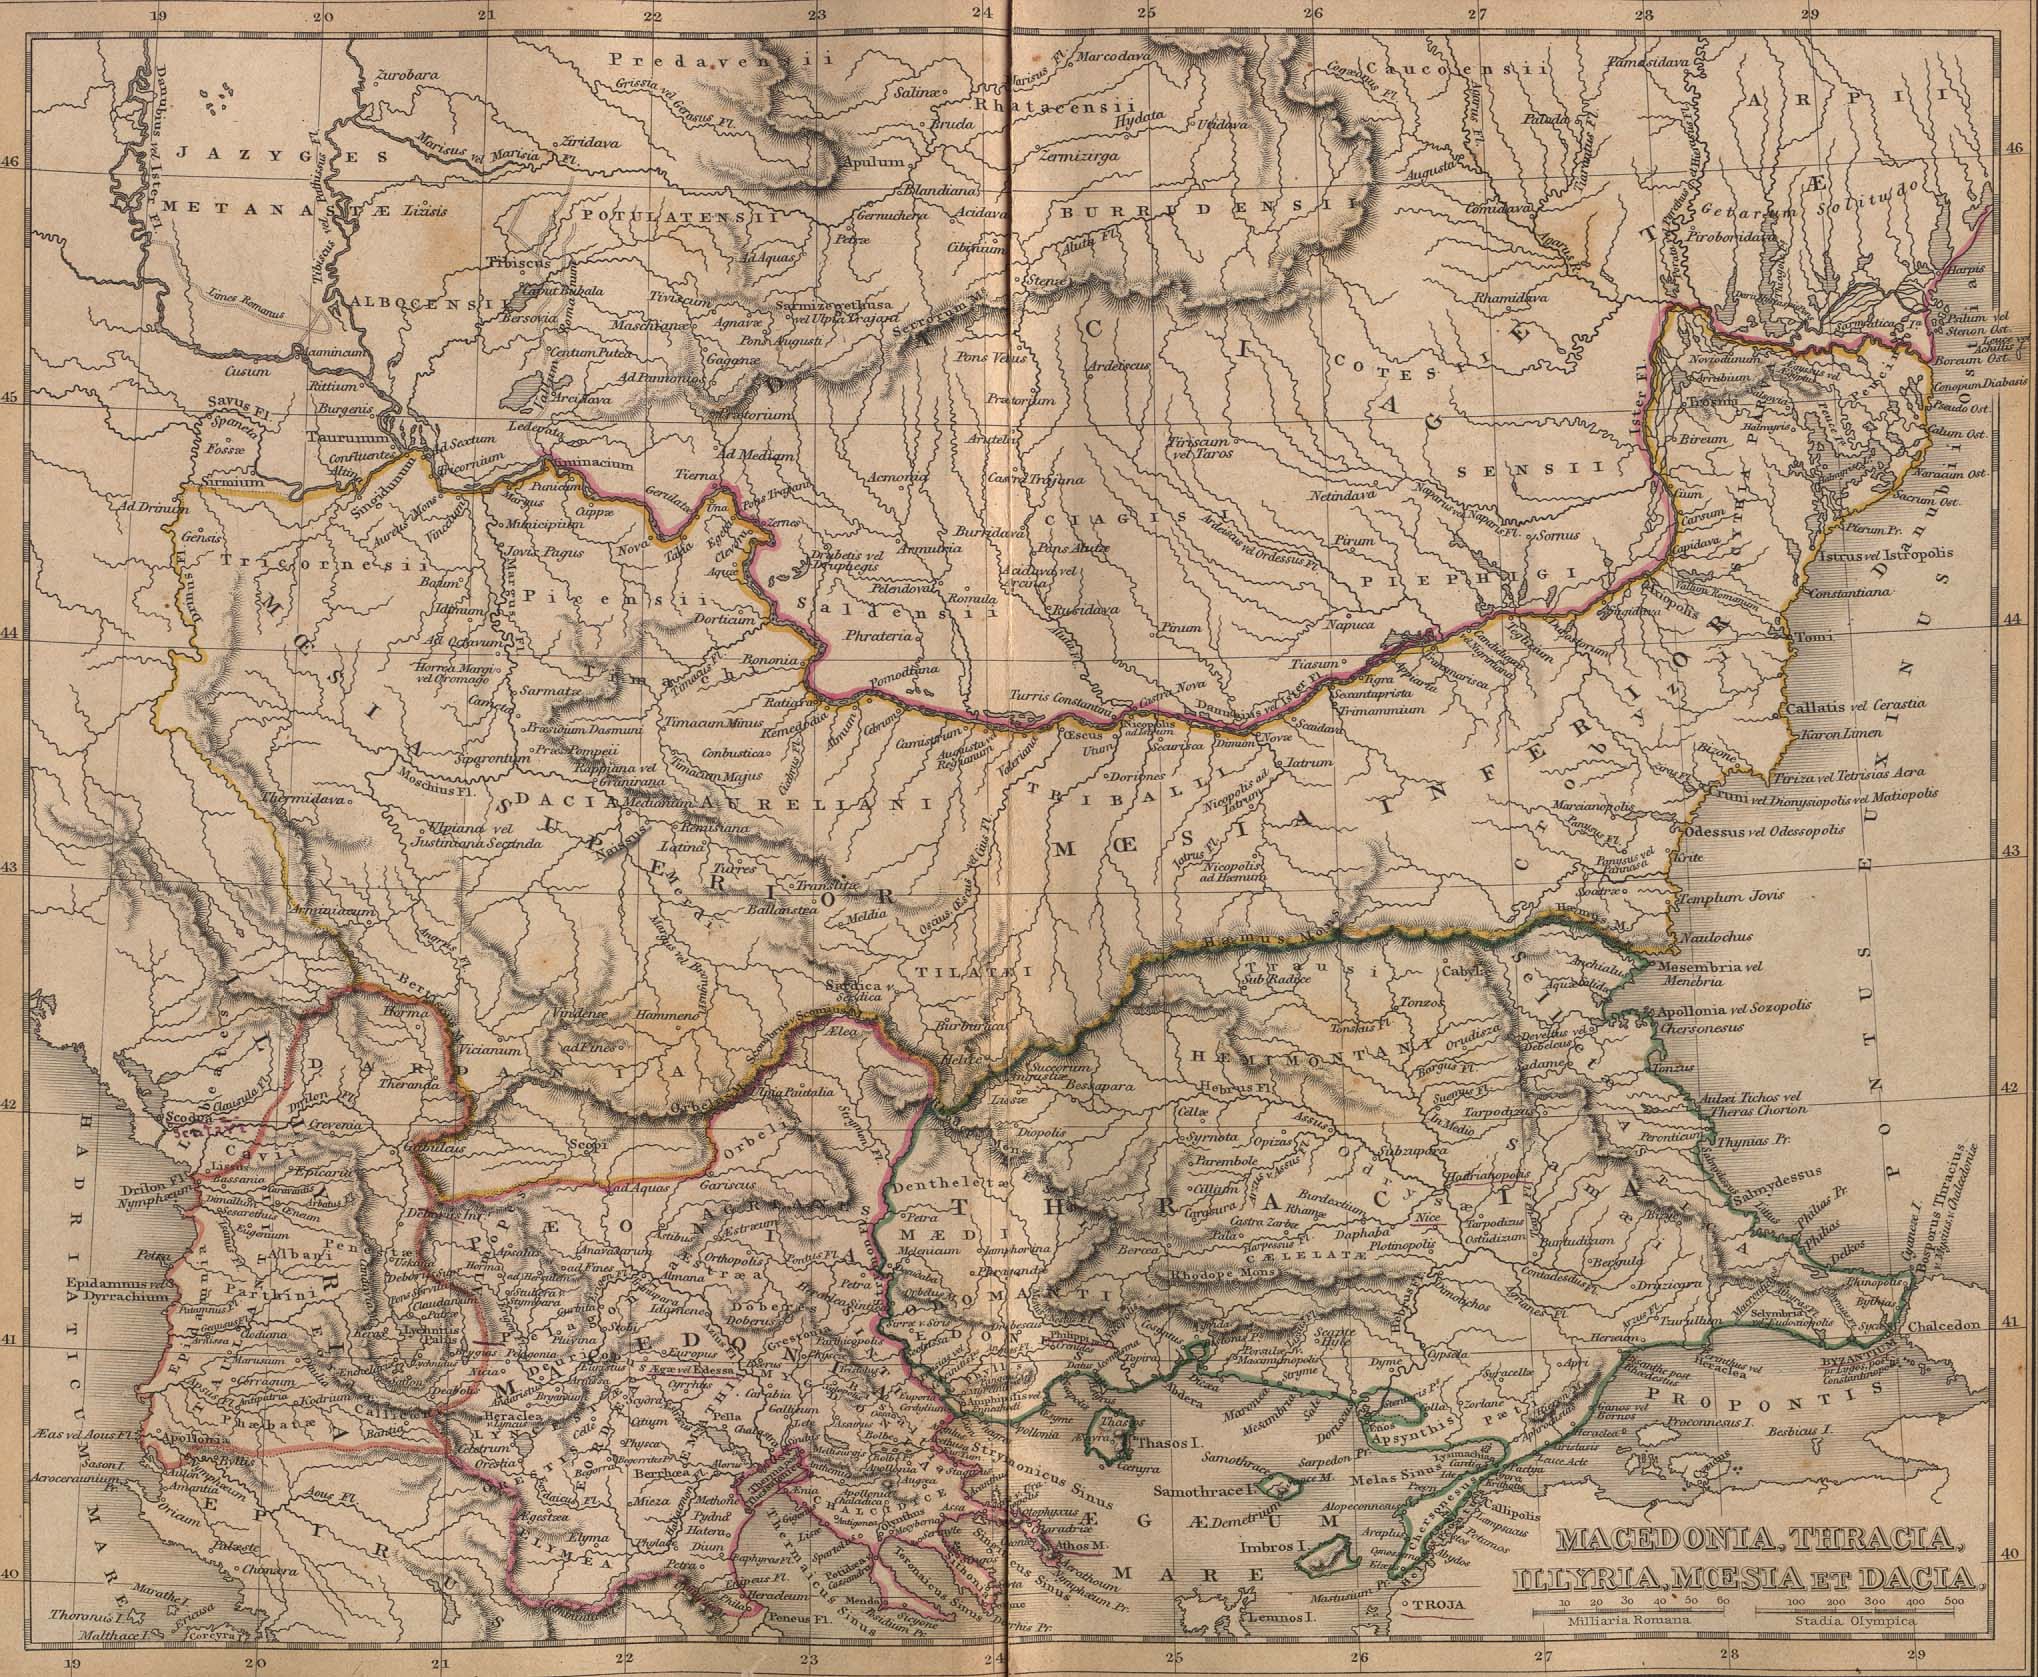 Historical Map of Balkan Macedonia, Thracia, Illyria, Moesia et Dacia [Ancient Balkans] (722K)Map from 'A Classical Atlas to Illustrate Ancient Geography' by Alexander G. Findlay, Harper and Brothers Publishers, New York, 1849.